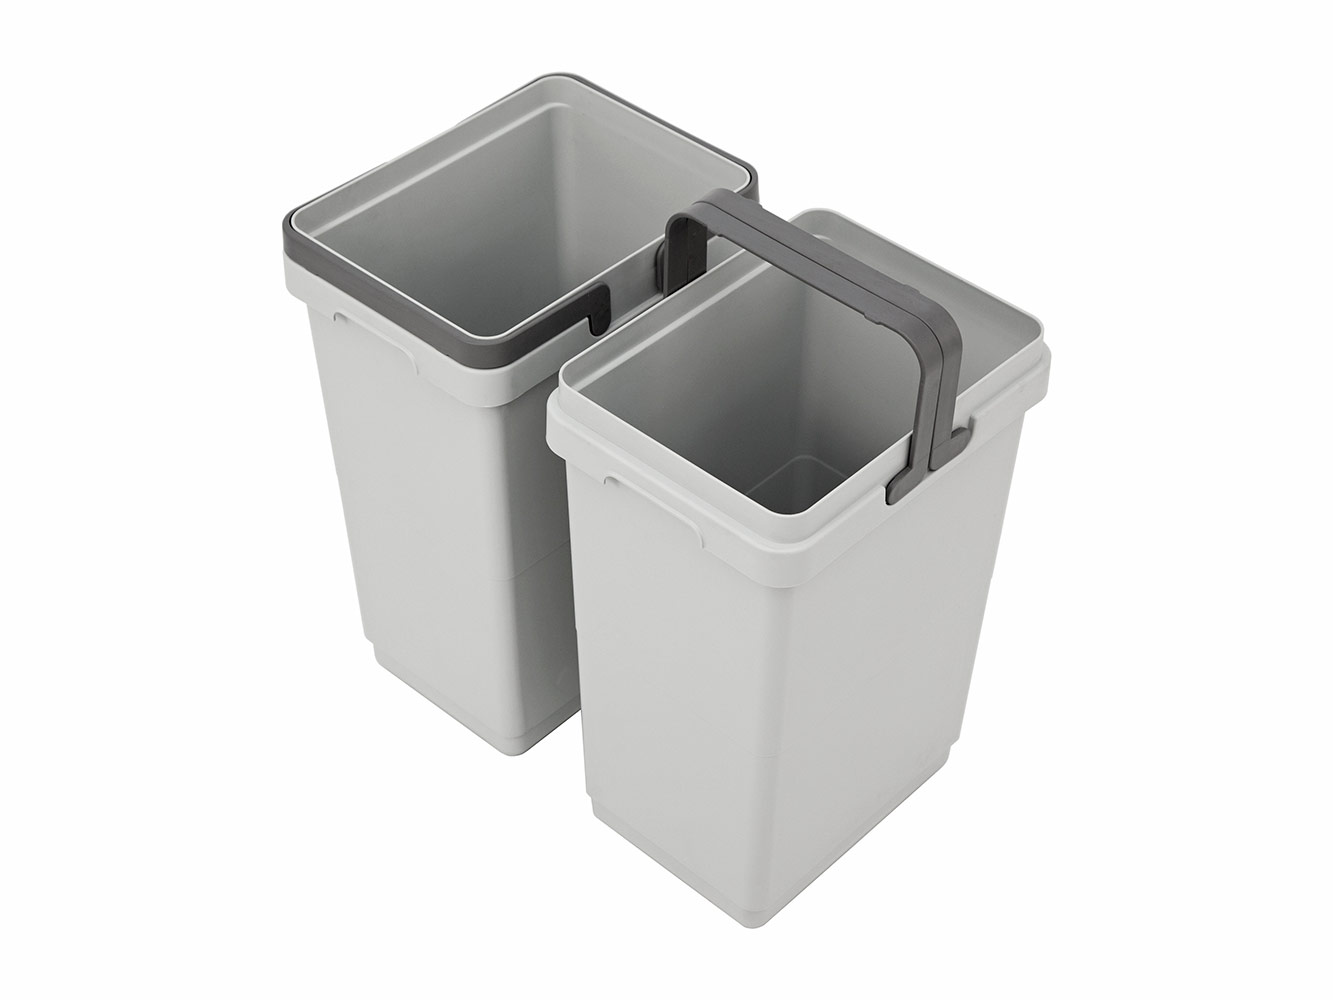 Rok Salice Kitchen Cabinet Soft Close Heavy Duty Waste Recycle Bin Trash Can Pull Out Organizer Container QPAM15228C 32 Quart Bins Double 15